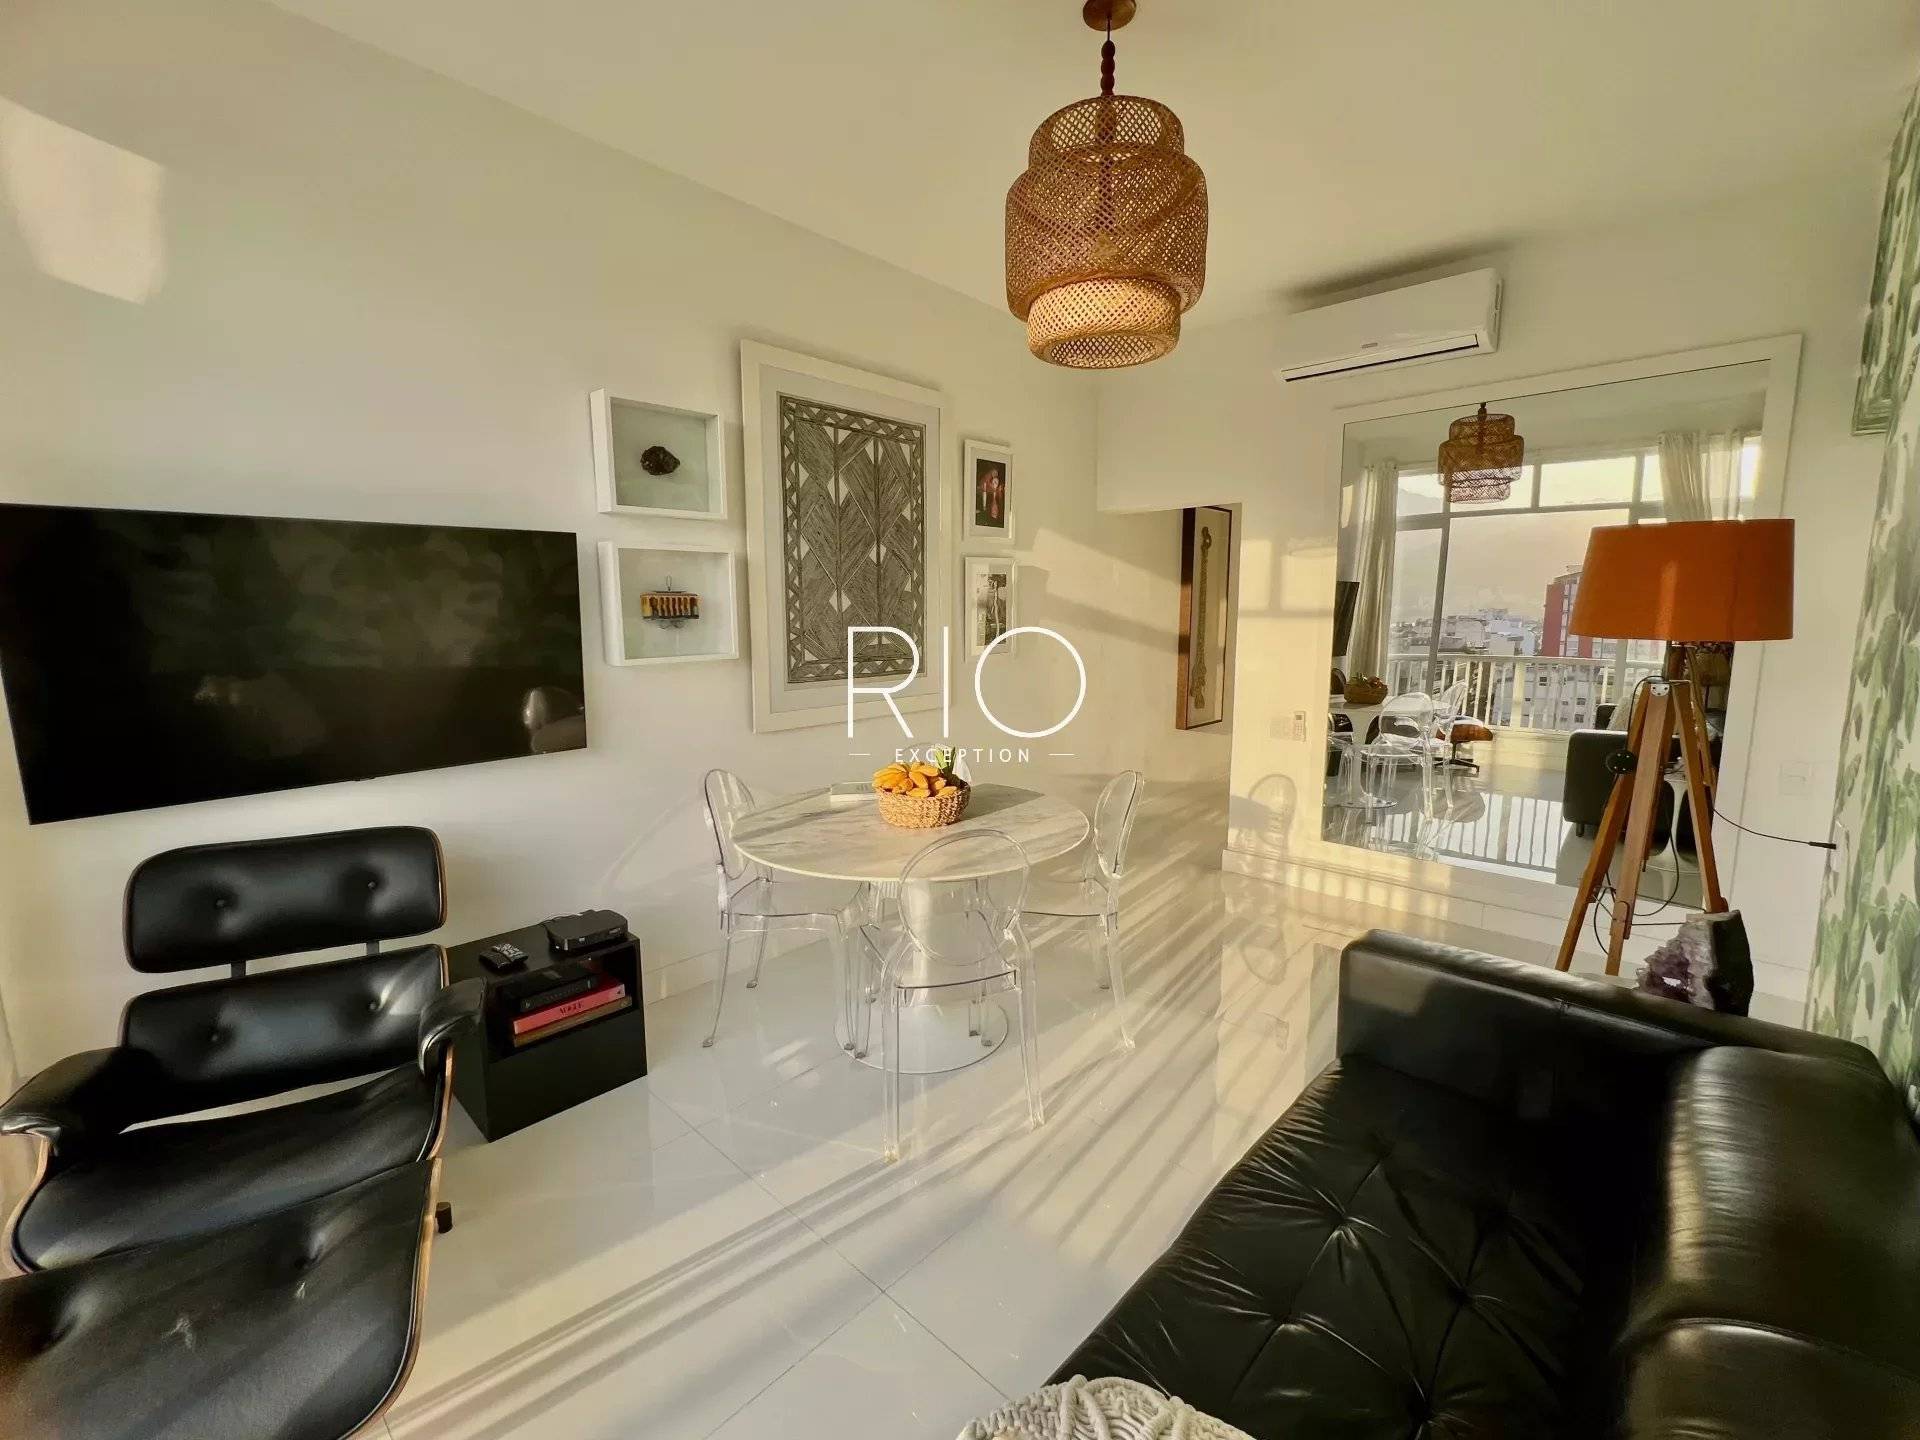 IPANEMA - Magnificent 2-bedroom apartment of 60m2 - Exceptional view!